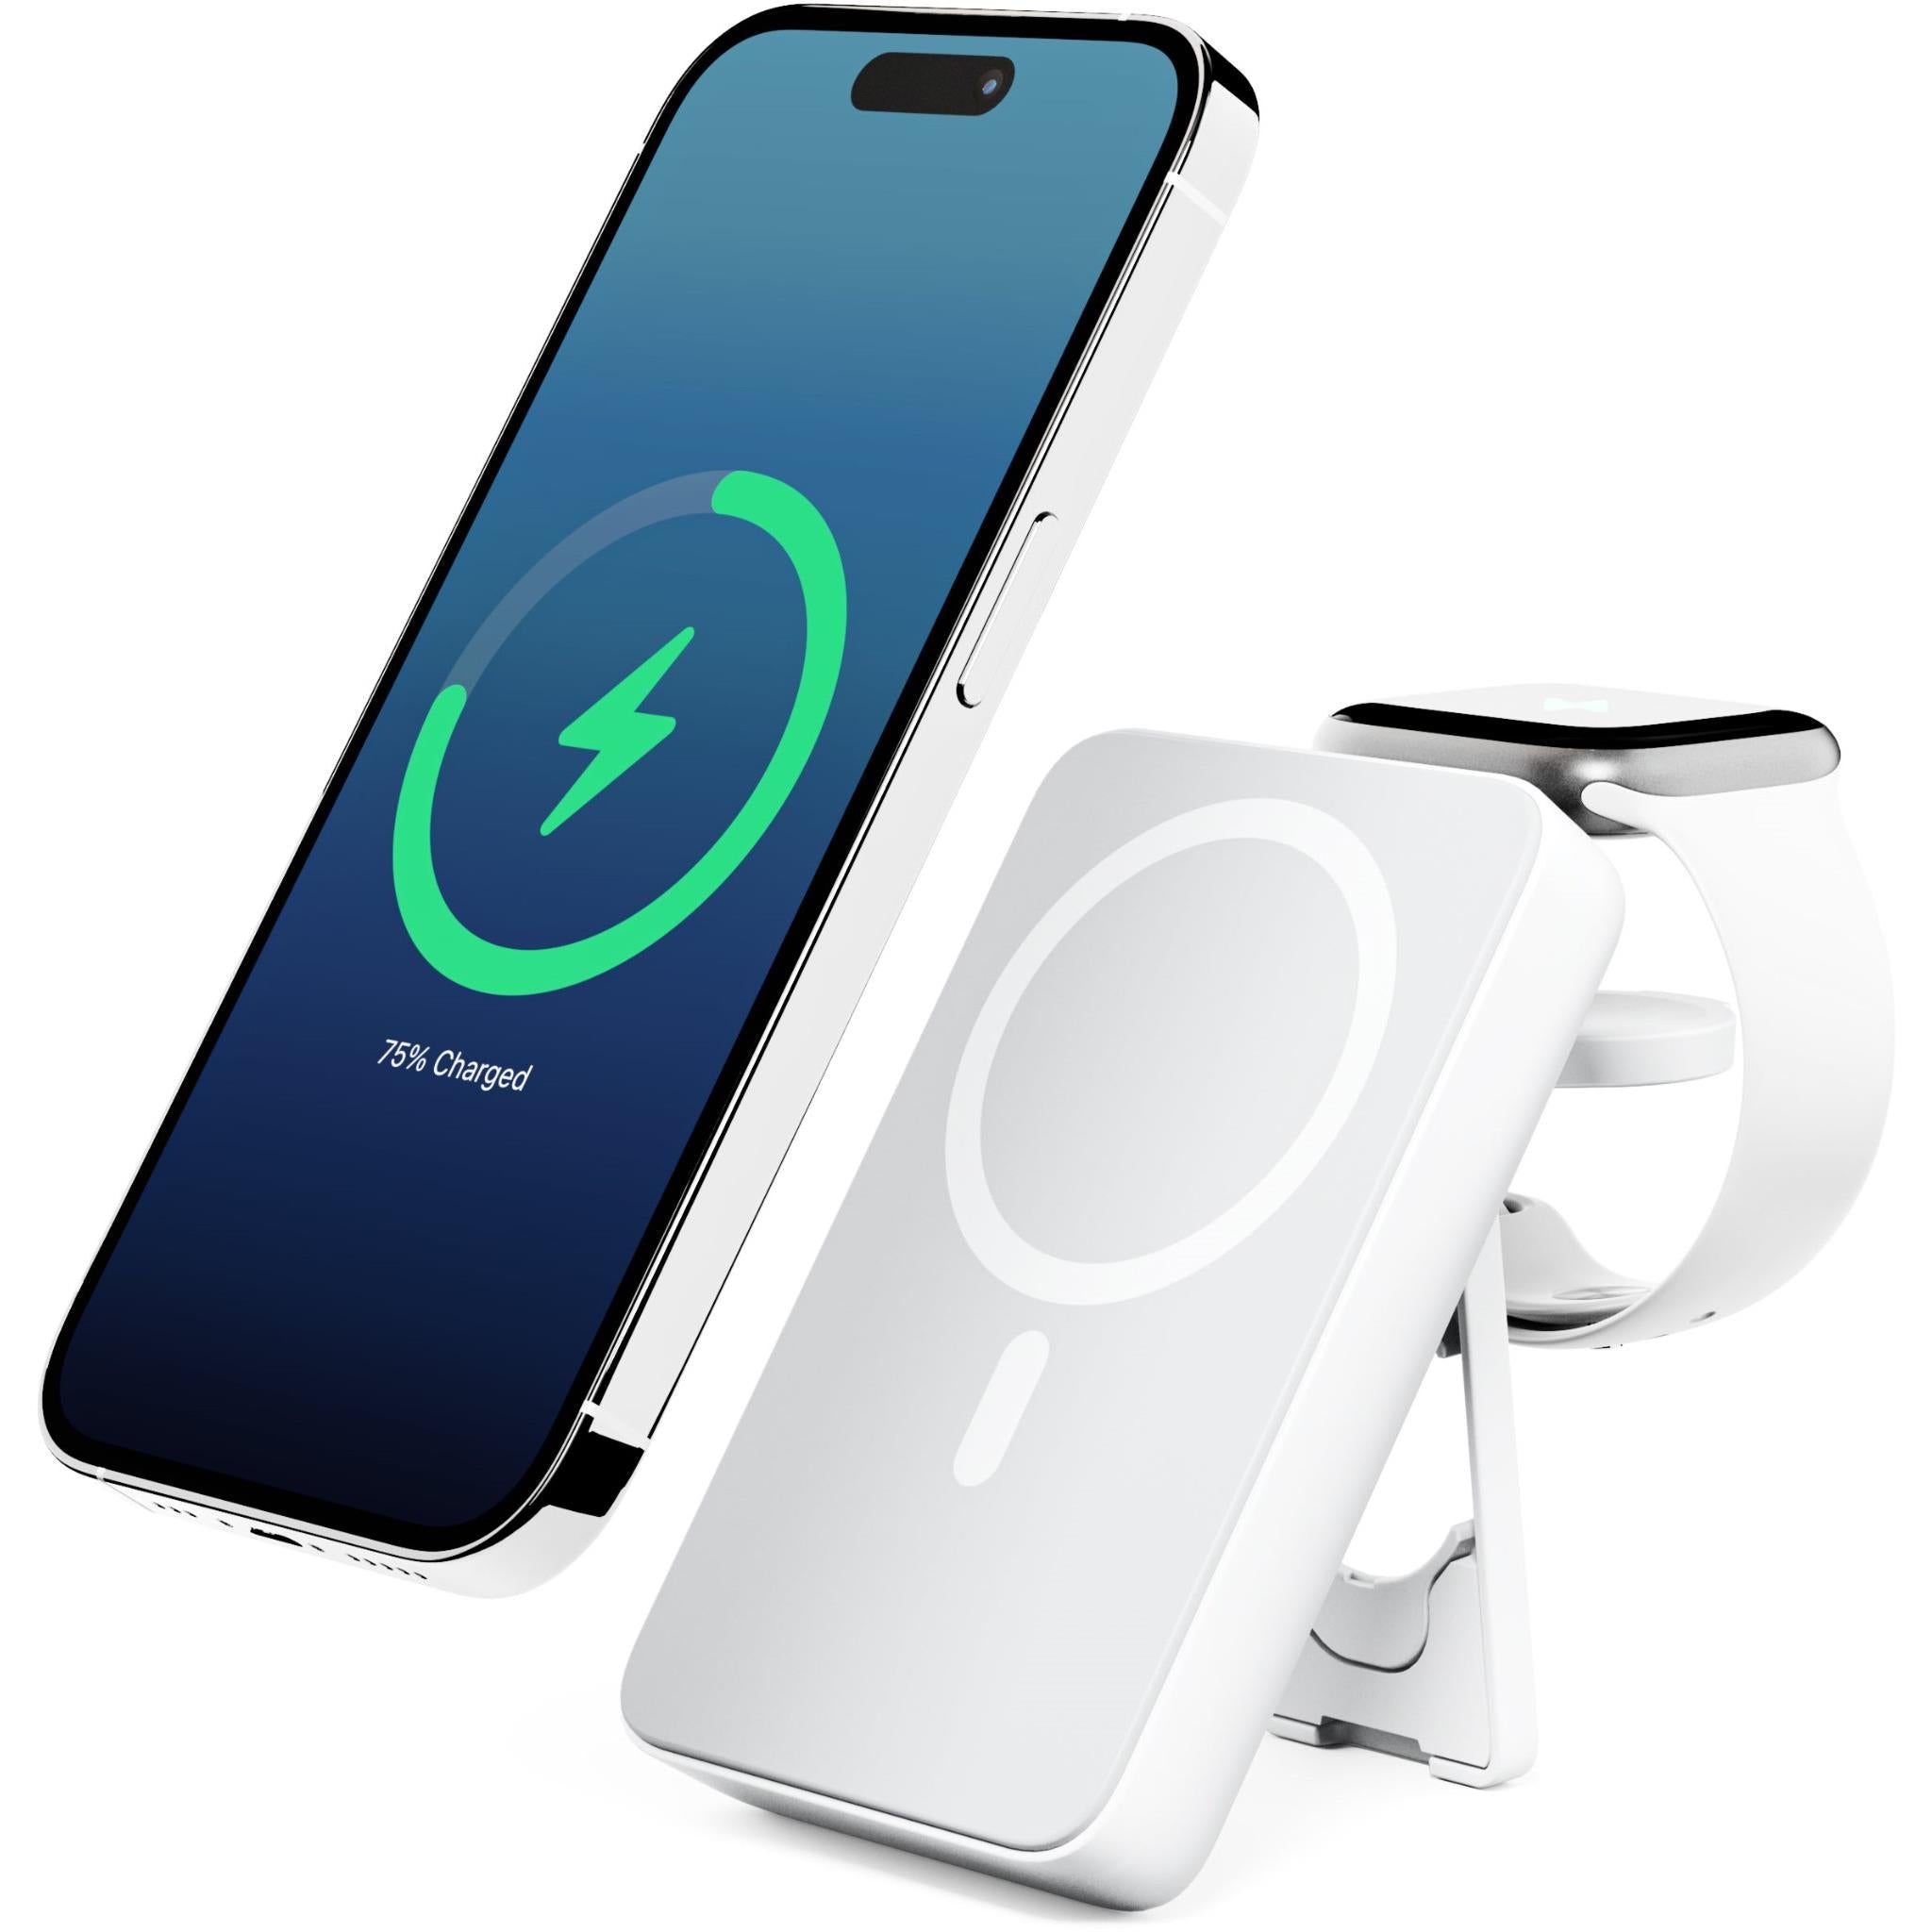 alogic 4-in-1 lift wireless charger with 10k power bank (white)